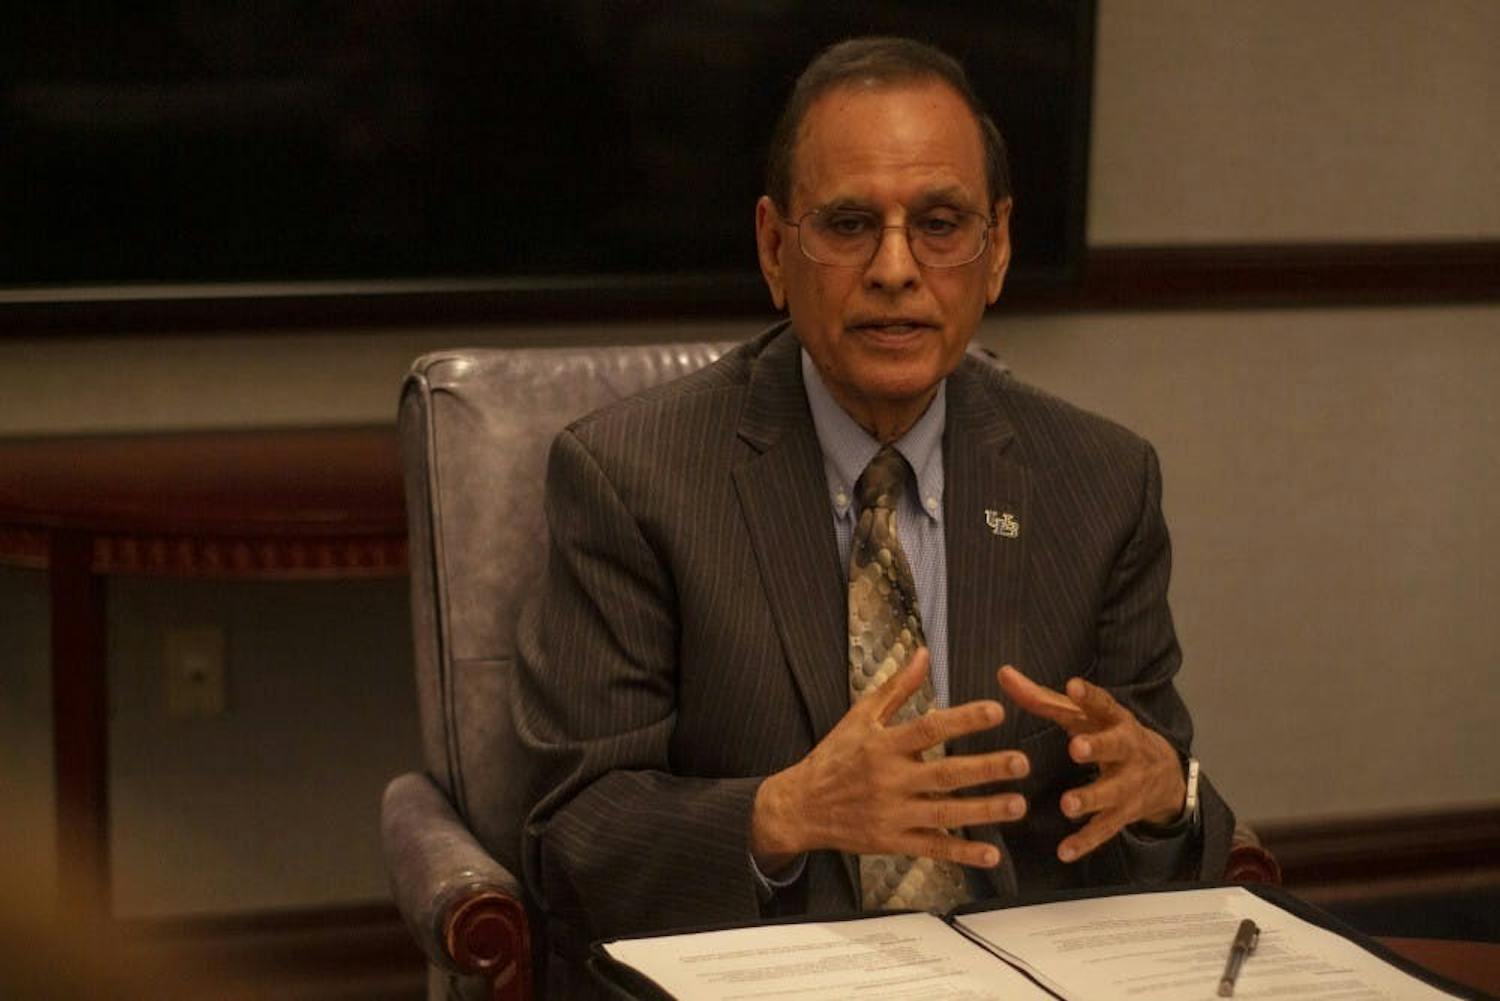 President Tripathi sat down with The Spectrum this month to discuss his interactions with students, the university’s plans to address mental health concerns and the recently rebranded UB Top 25 Ambition initiative.&nbsp;